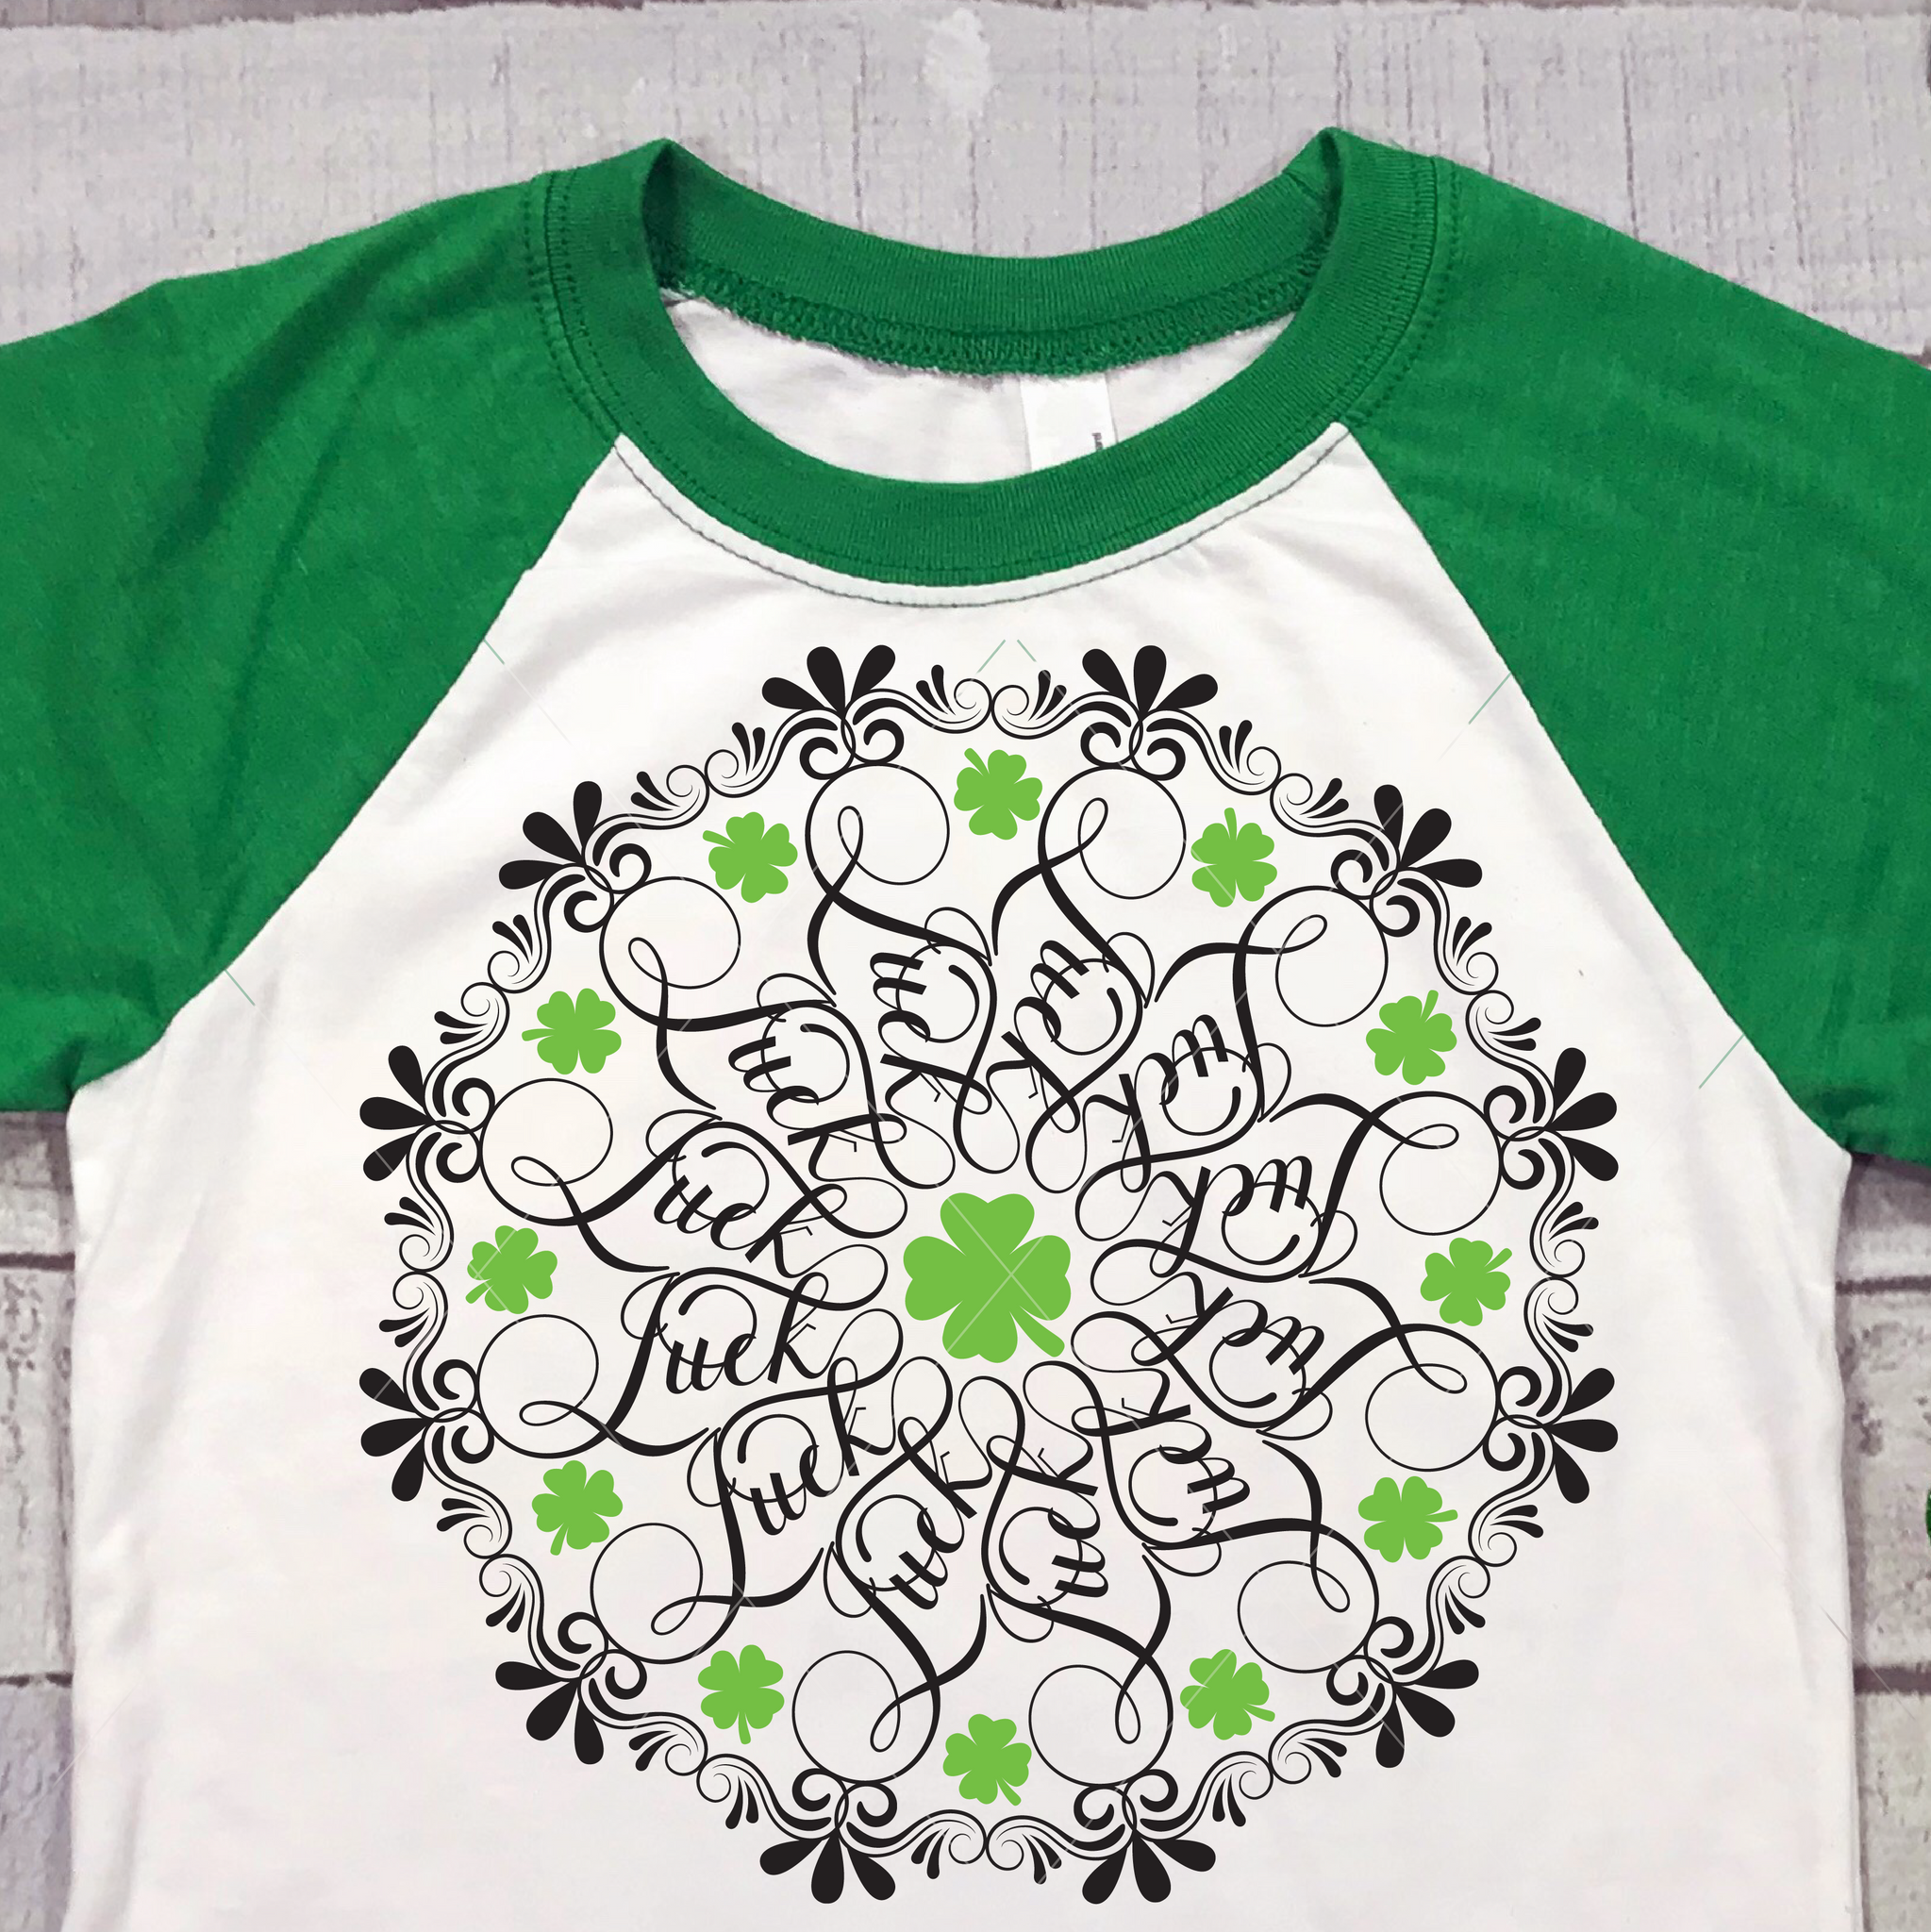 St Patrick's Day "Lucky" Word Mandala SVG File for Cricut/Silhouette - Commercial Use SVG Files for Cricut & Silhouette